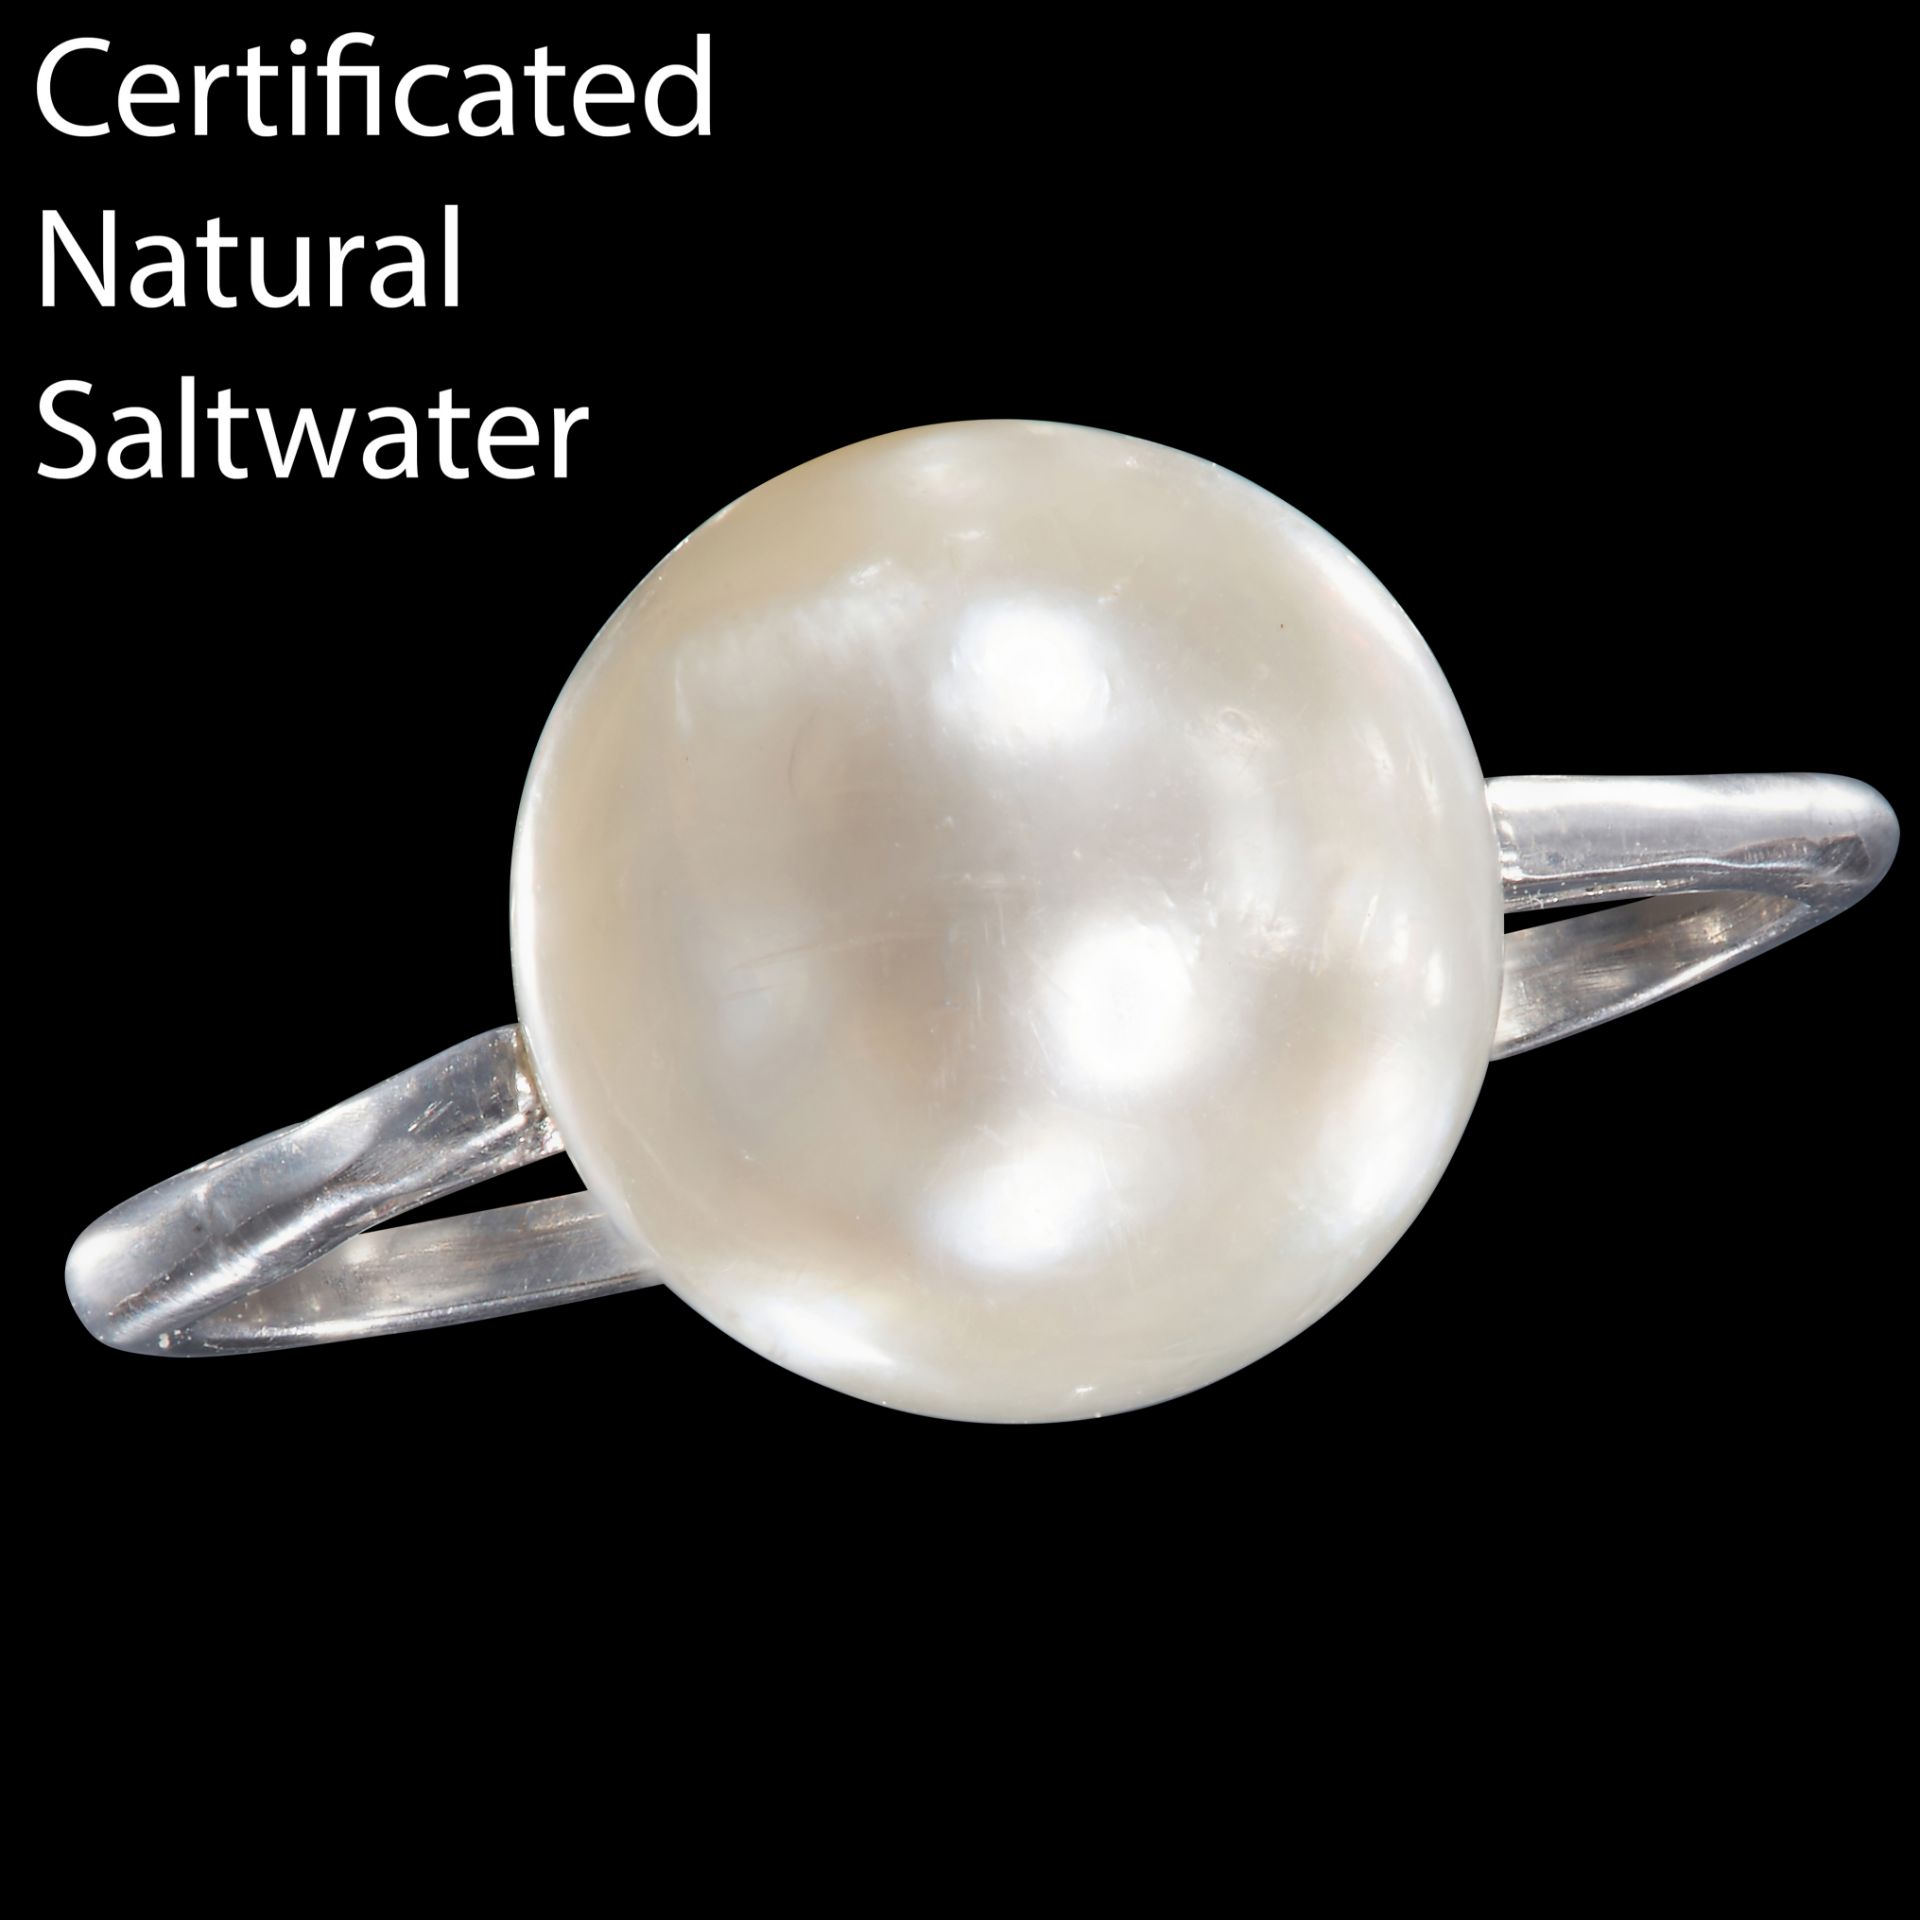 LARGE CERTIFICATED NATURAL SALTWATER PEARL RING - Image 2 of 3